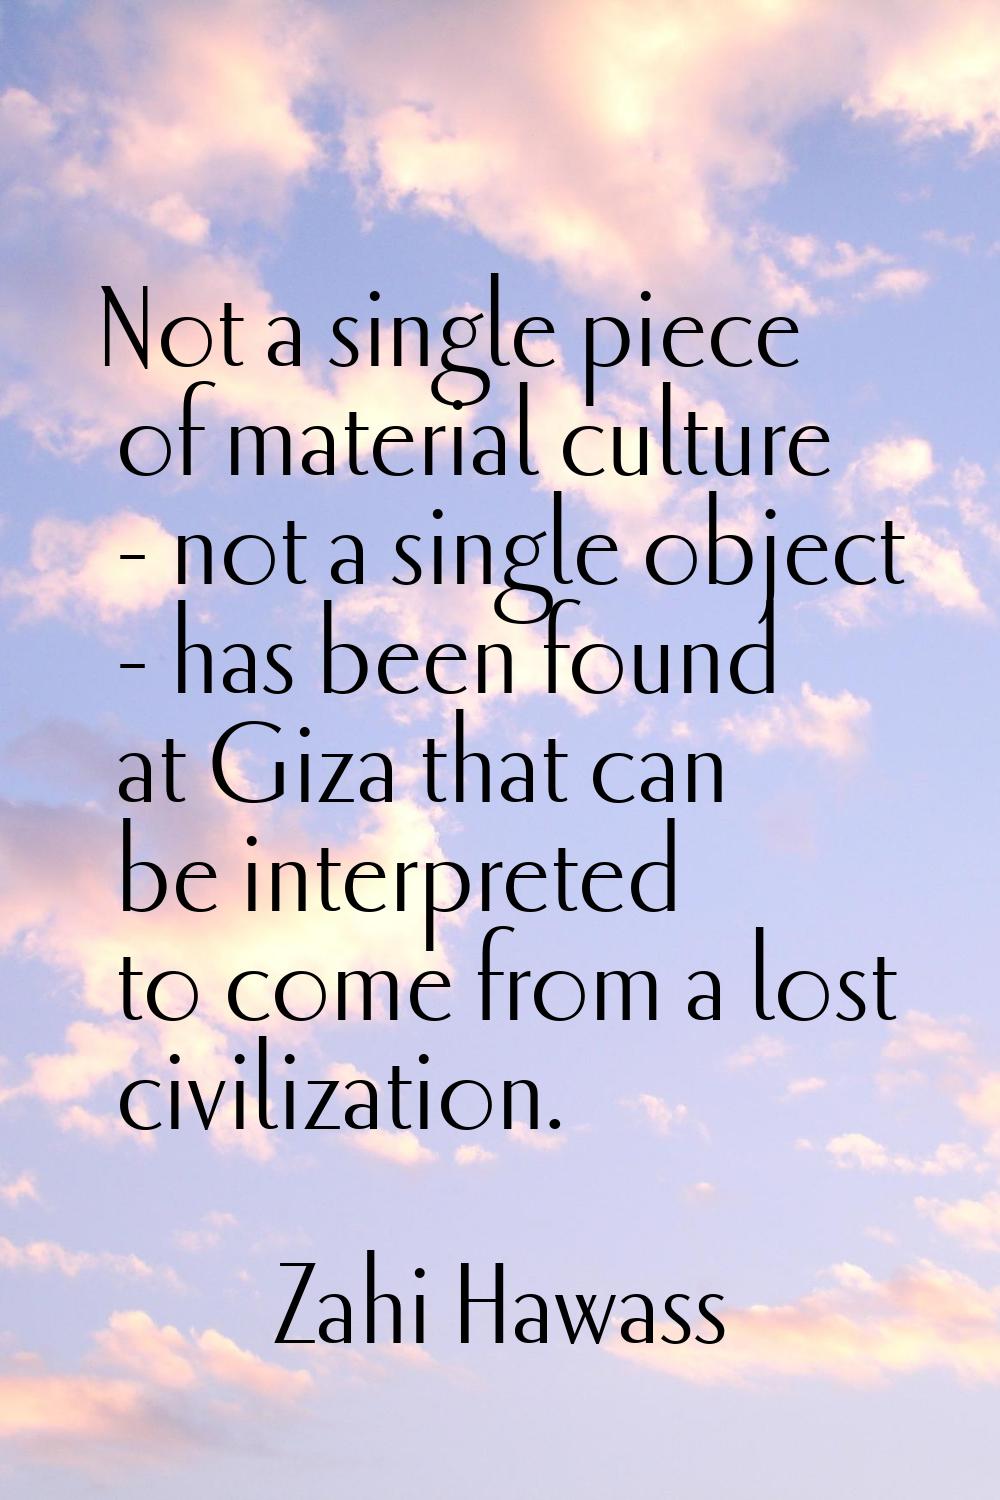 Not a single piece of material culture - not a single object - has been found at Giza that can be i